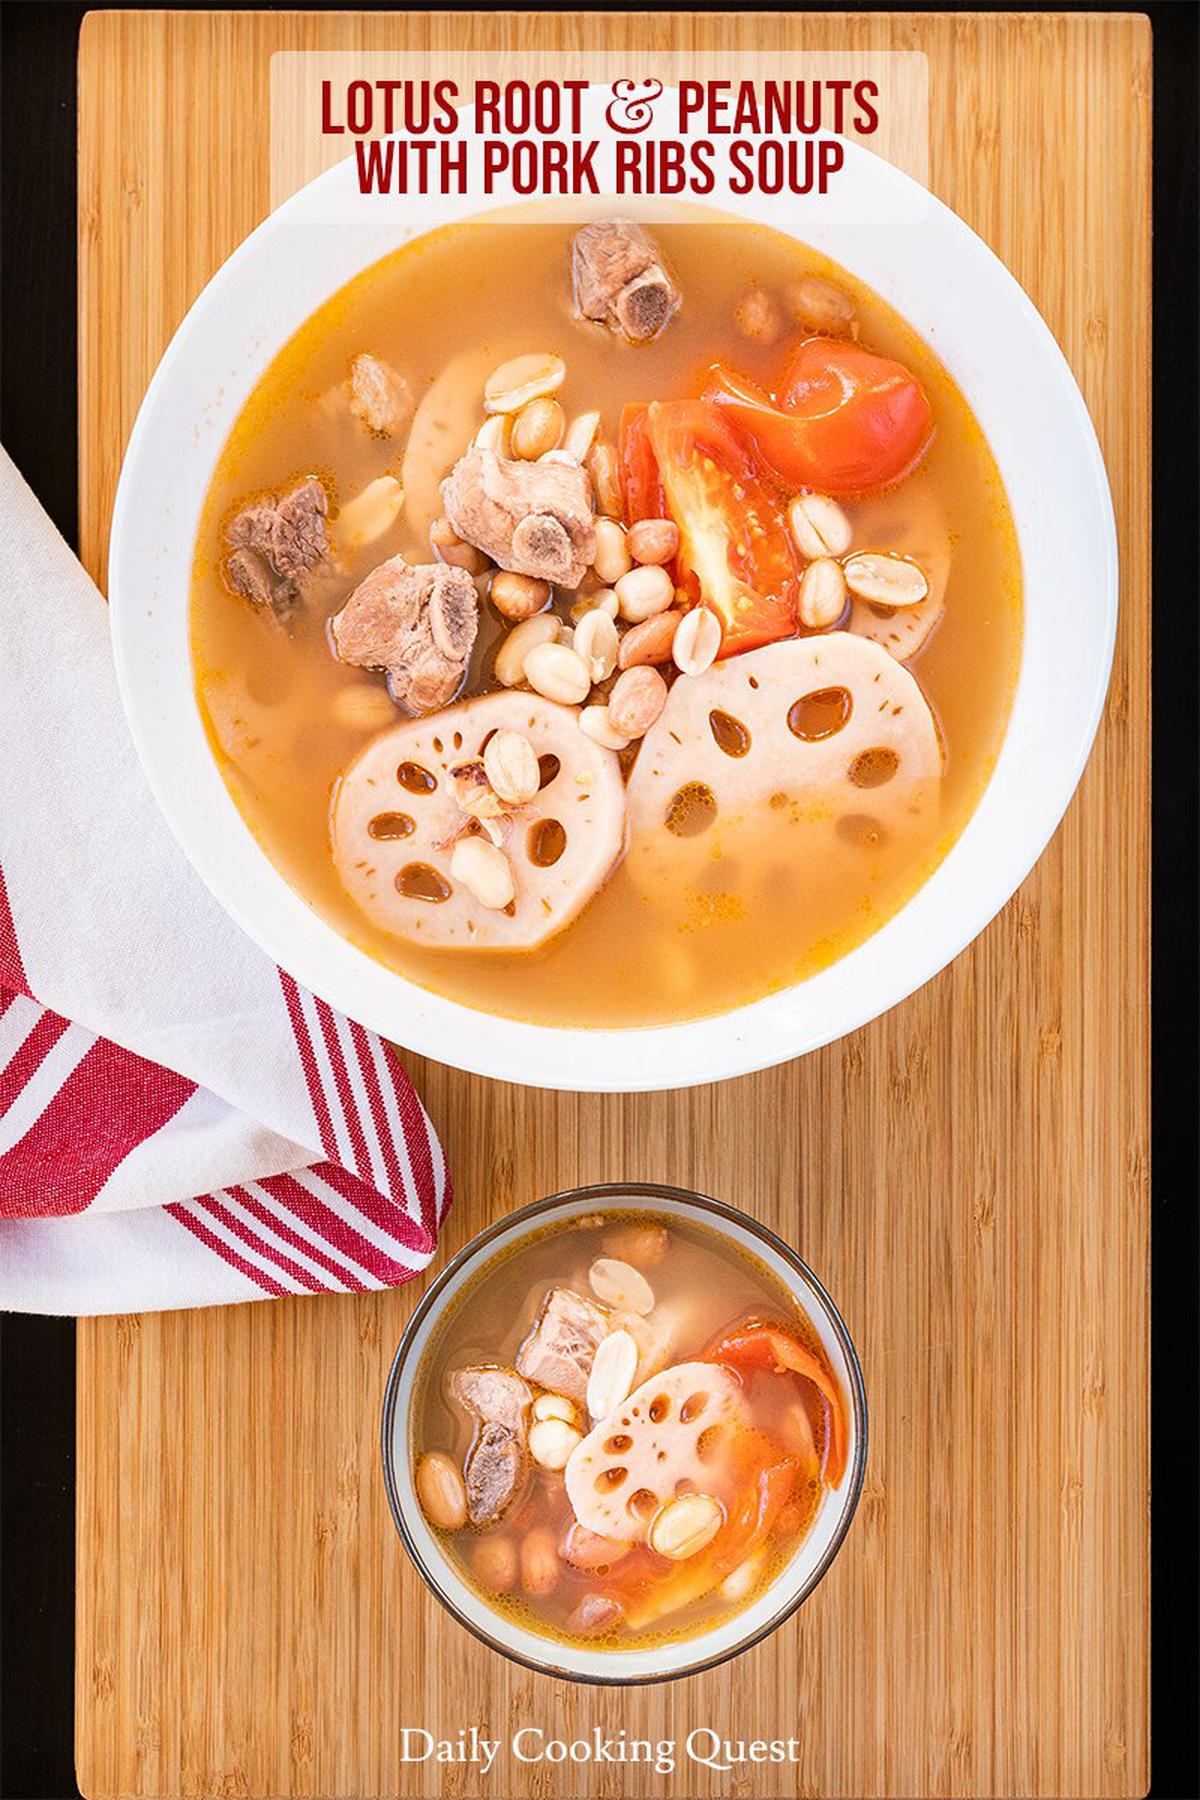 Lotus Root and Peanuts with Pork Ribs Soup Recipe | Daily Cooking Quest